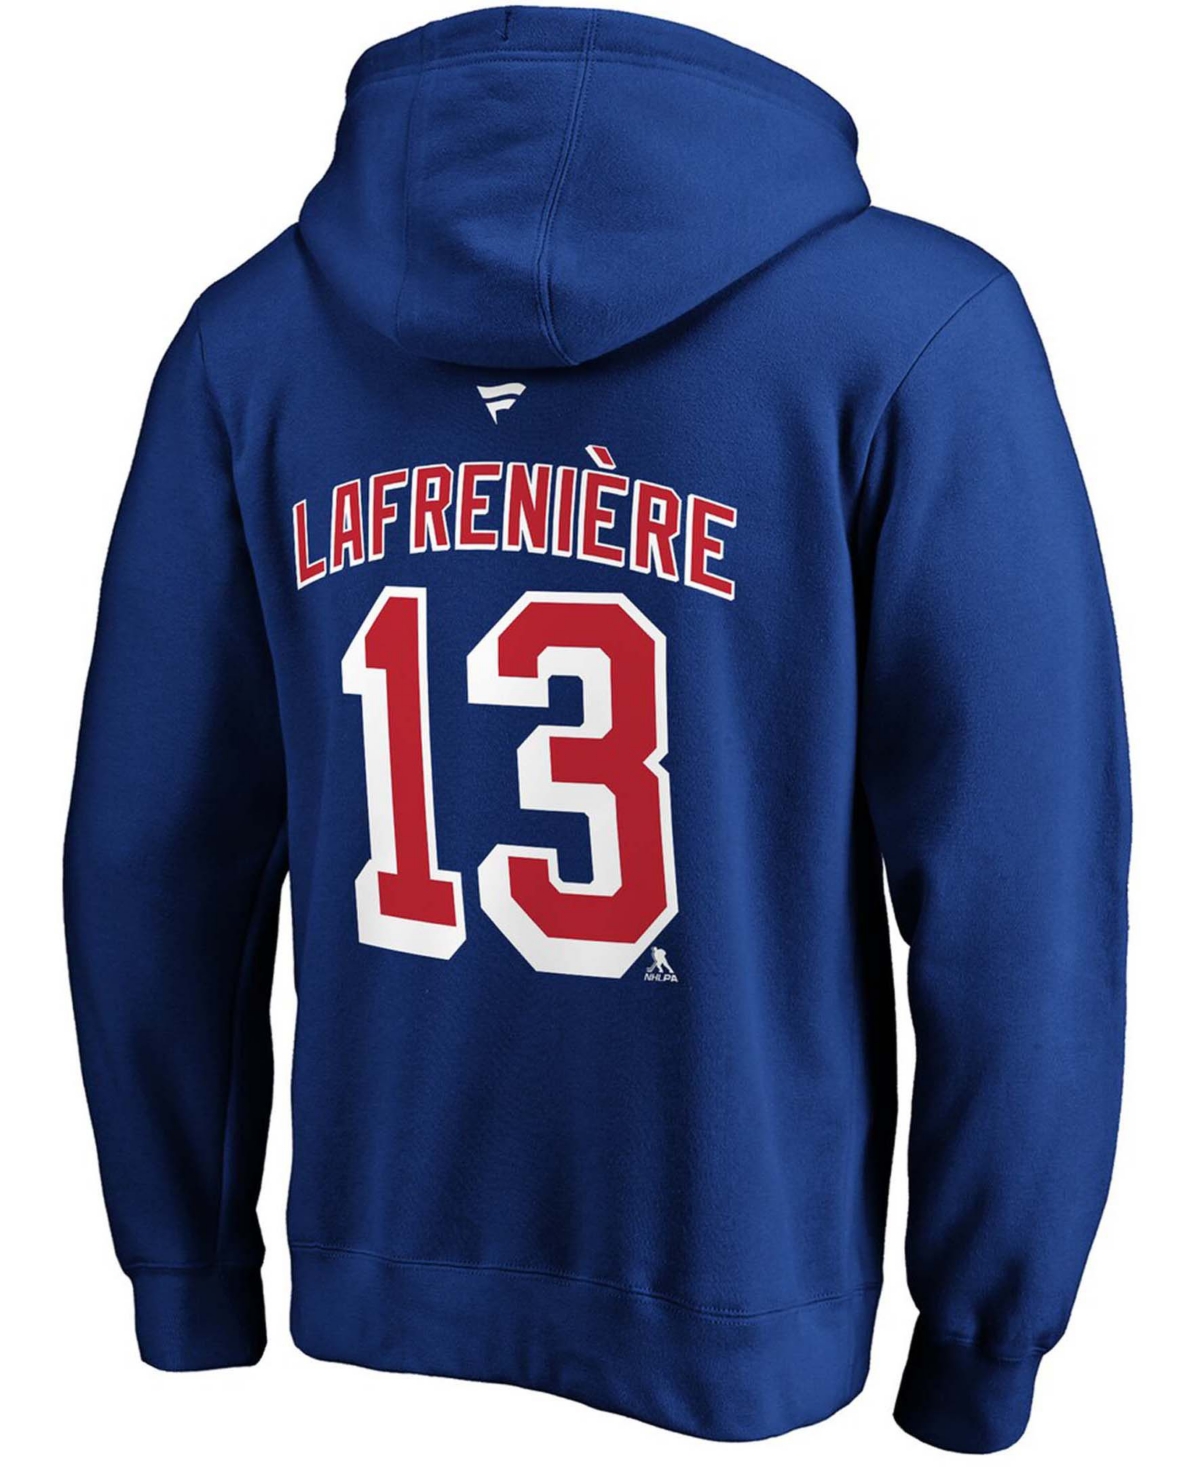 Shop Fanatics Men's Alexis Lafreniere Royal New York Rangers Authentic Stack Name And Number Pullover Hoodie